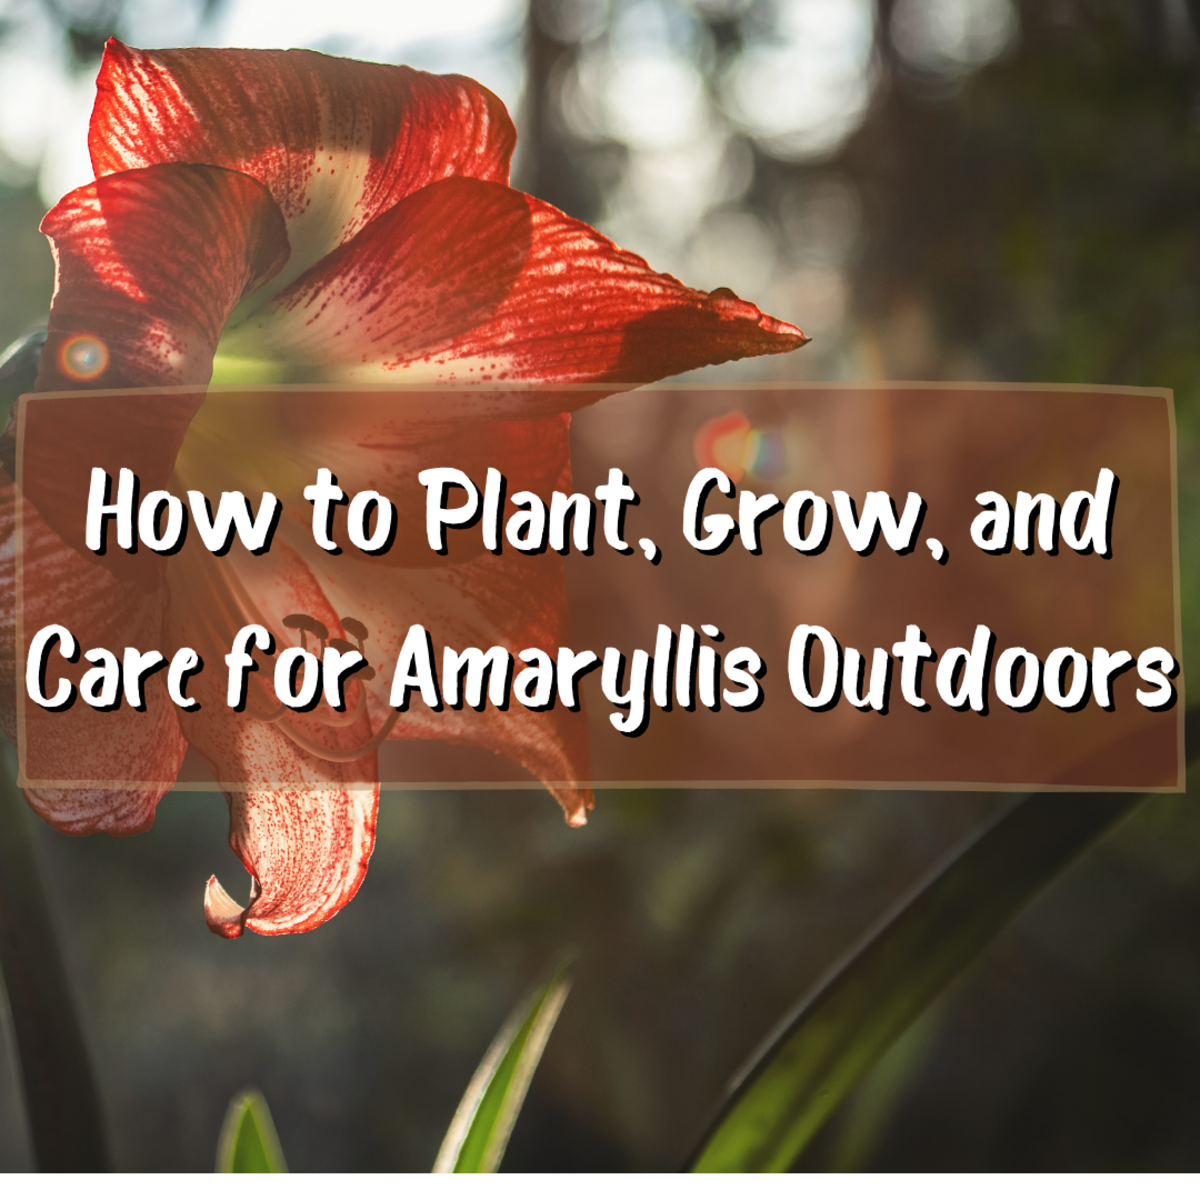 How to Plant, Grow, and Care for Amaryllis Outdoors